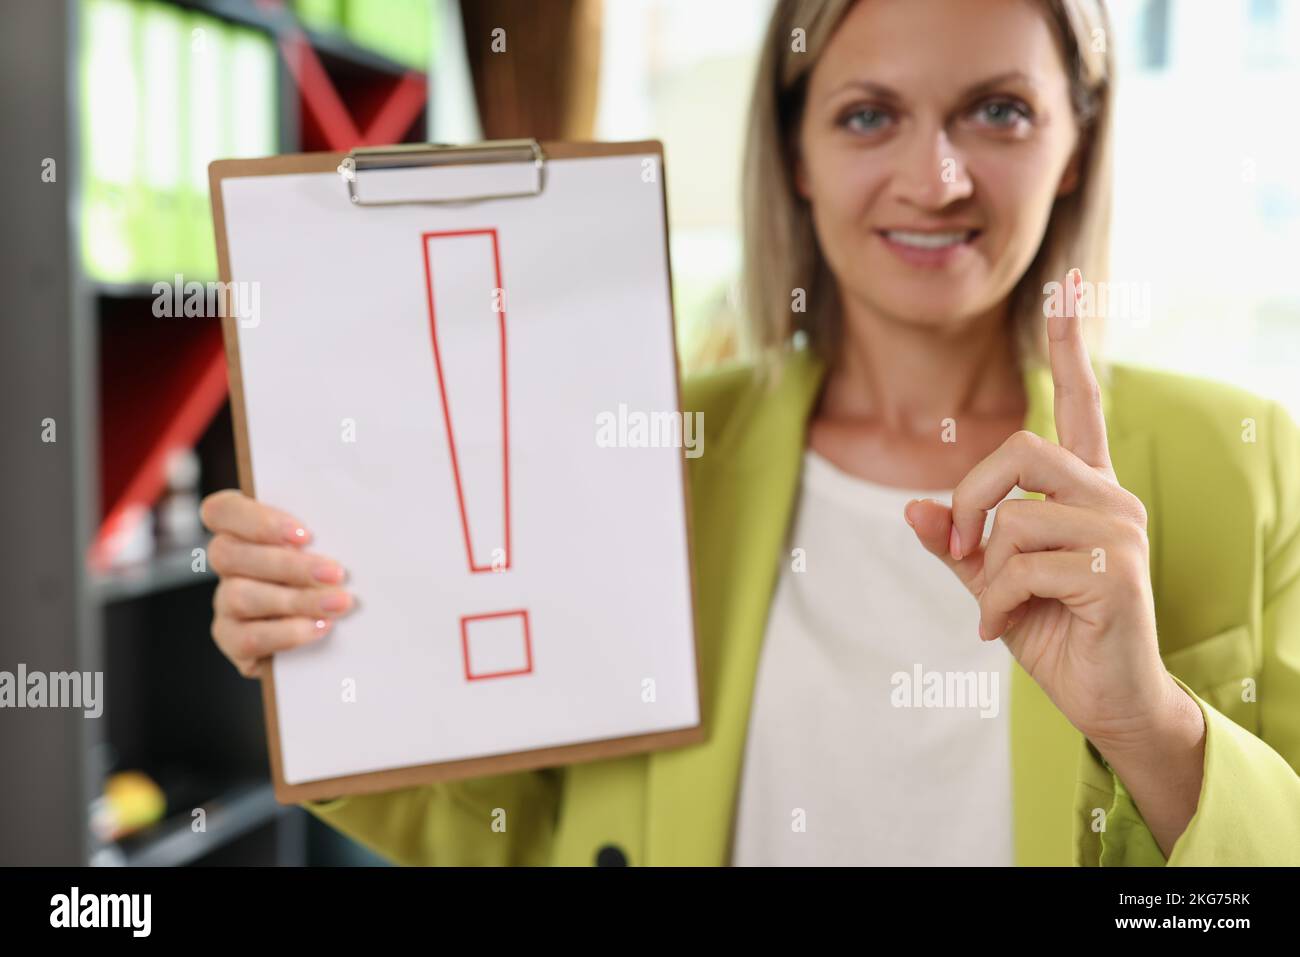 Smiling woman holding clipboard with red exclamation point Stock Photo